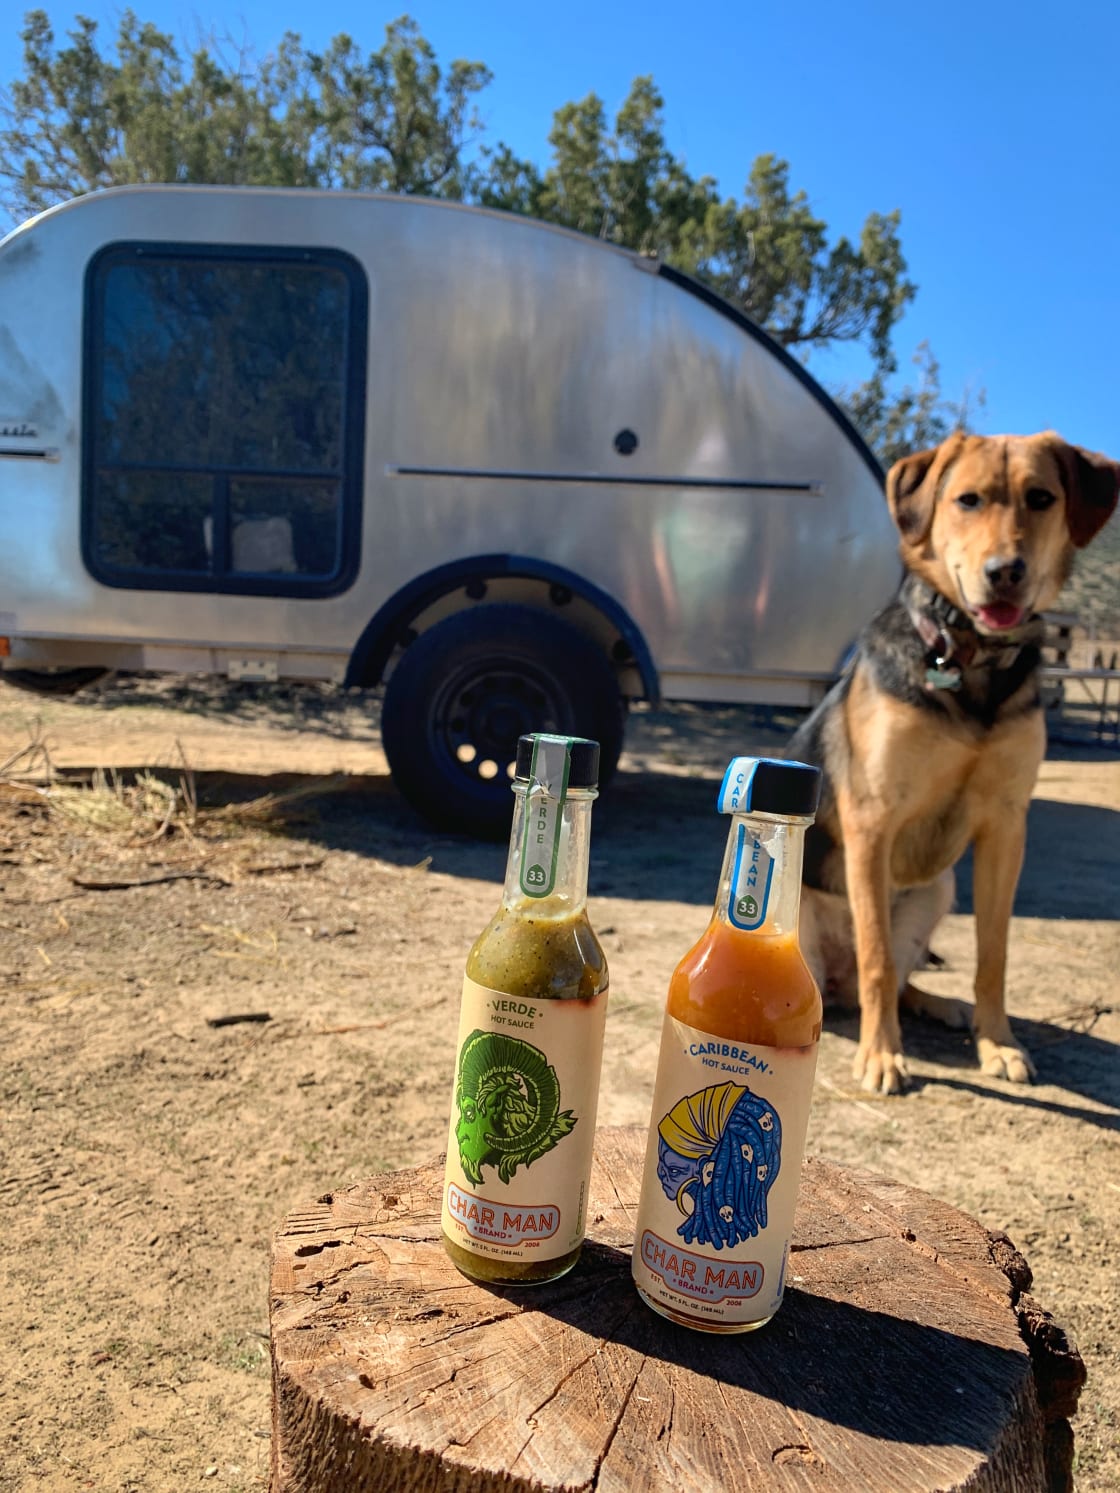 At the campsite with the best hot sauce we found at the pistachio company just up the road!